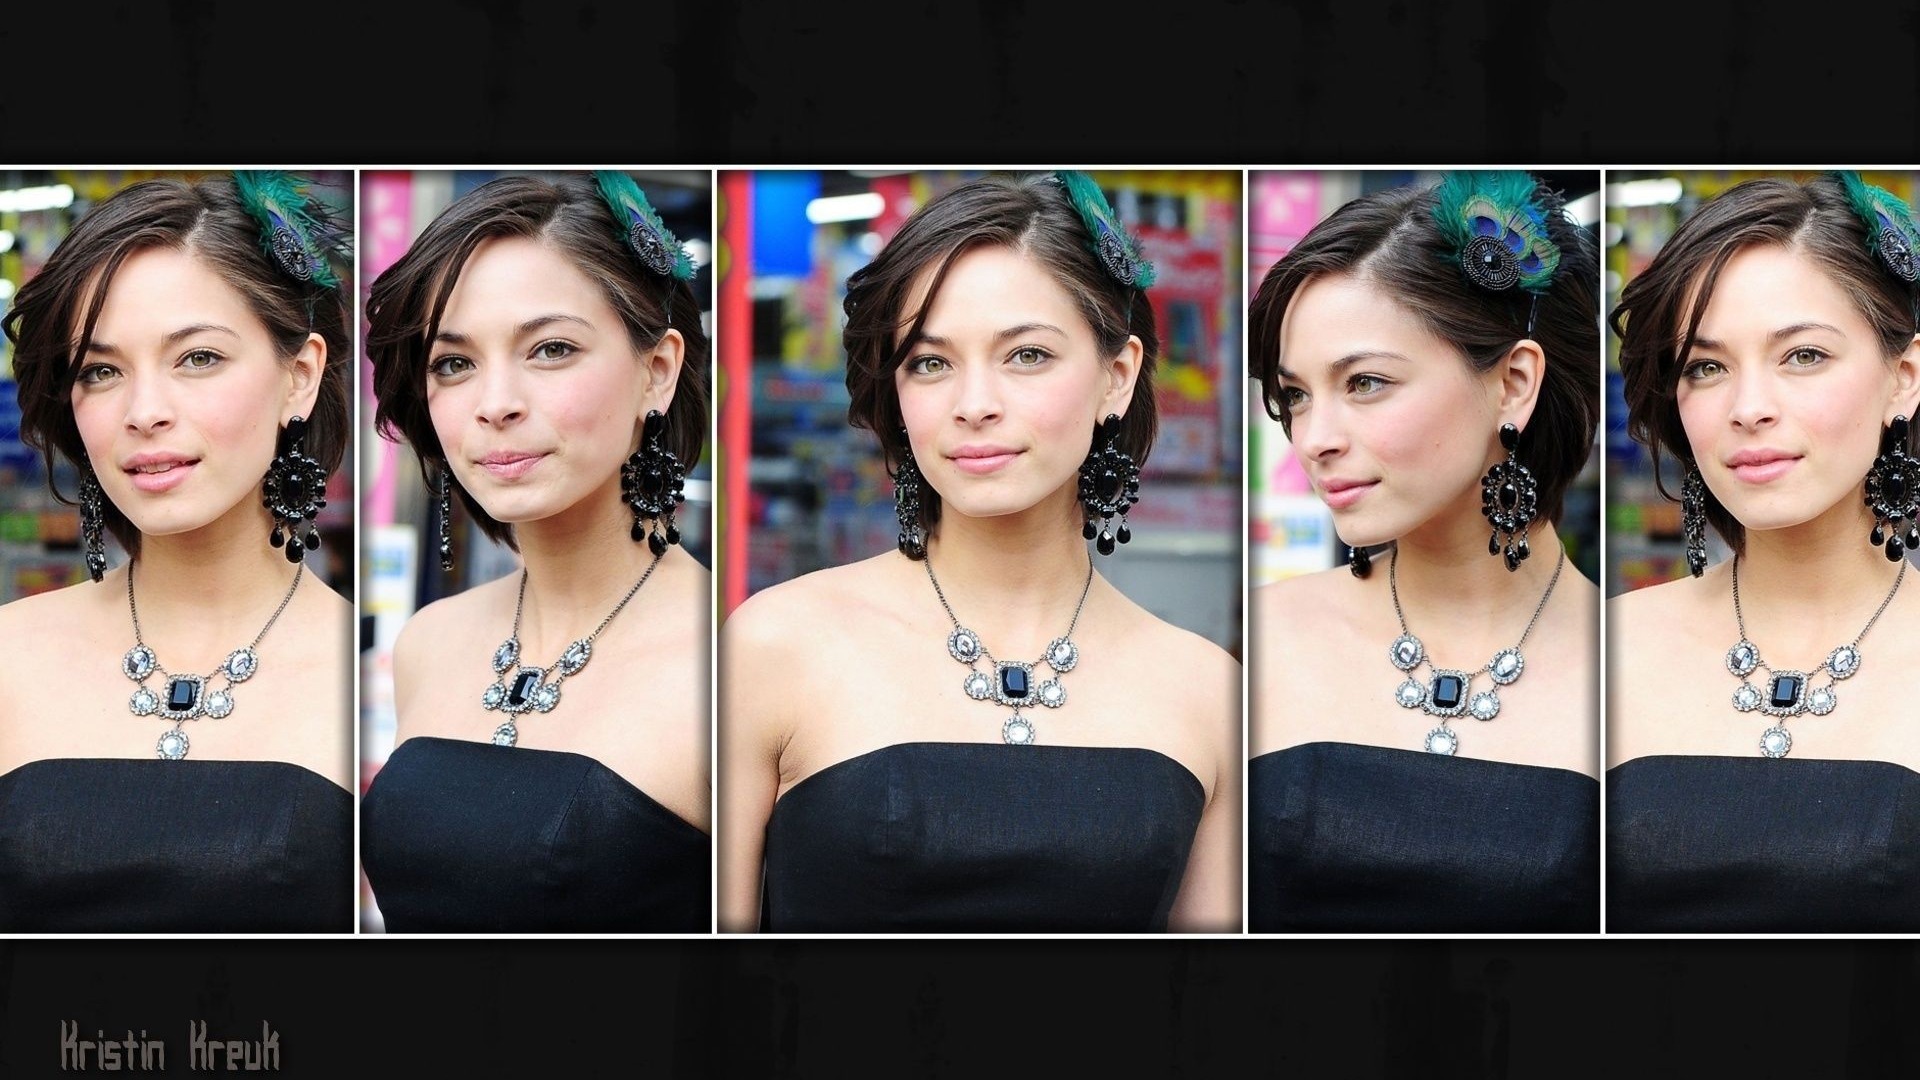 Kristin Kreuk #015 - 1920x1080 Wallpapers Pictures Photos Images